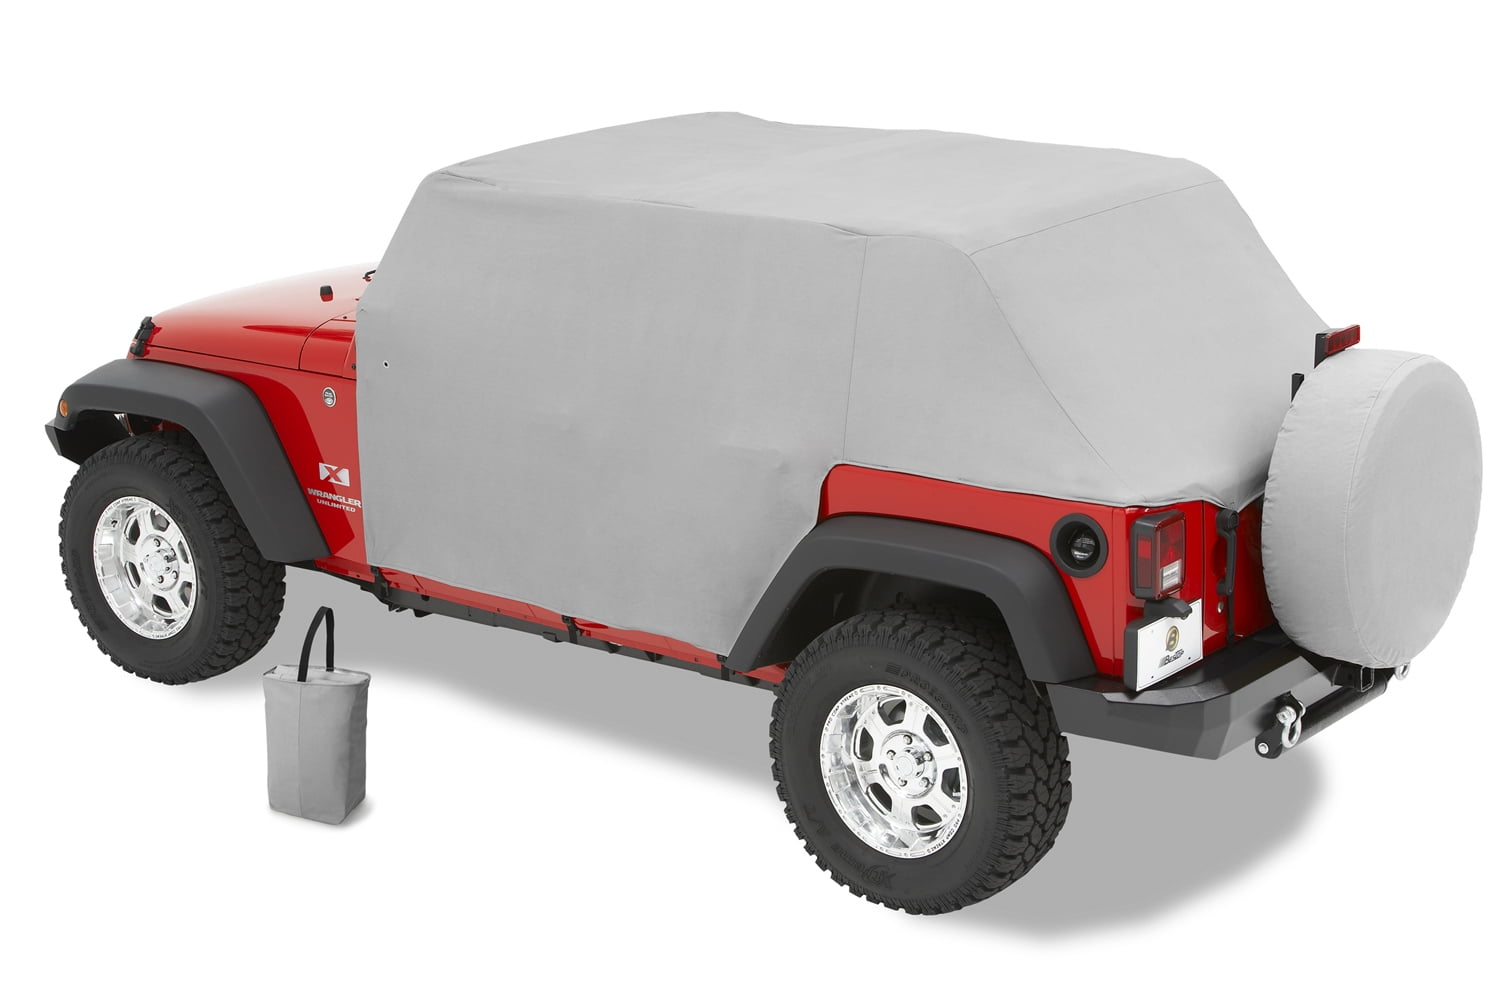 Seal Skin Covers Universal Truck Car Cover - Indoor/Outdoor - Grey -  Waterproof - Lined - SEAL-TEC Technology in the Universal Car Covers  department at